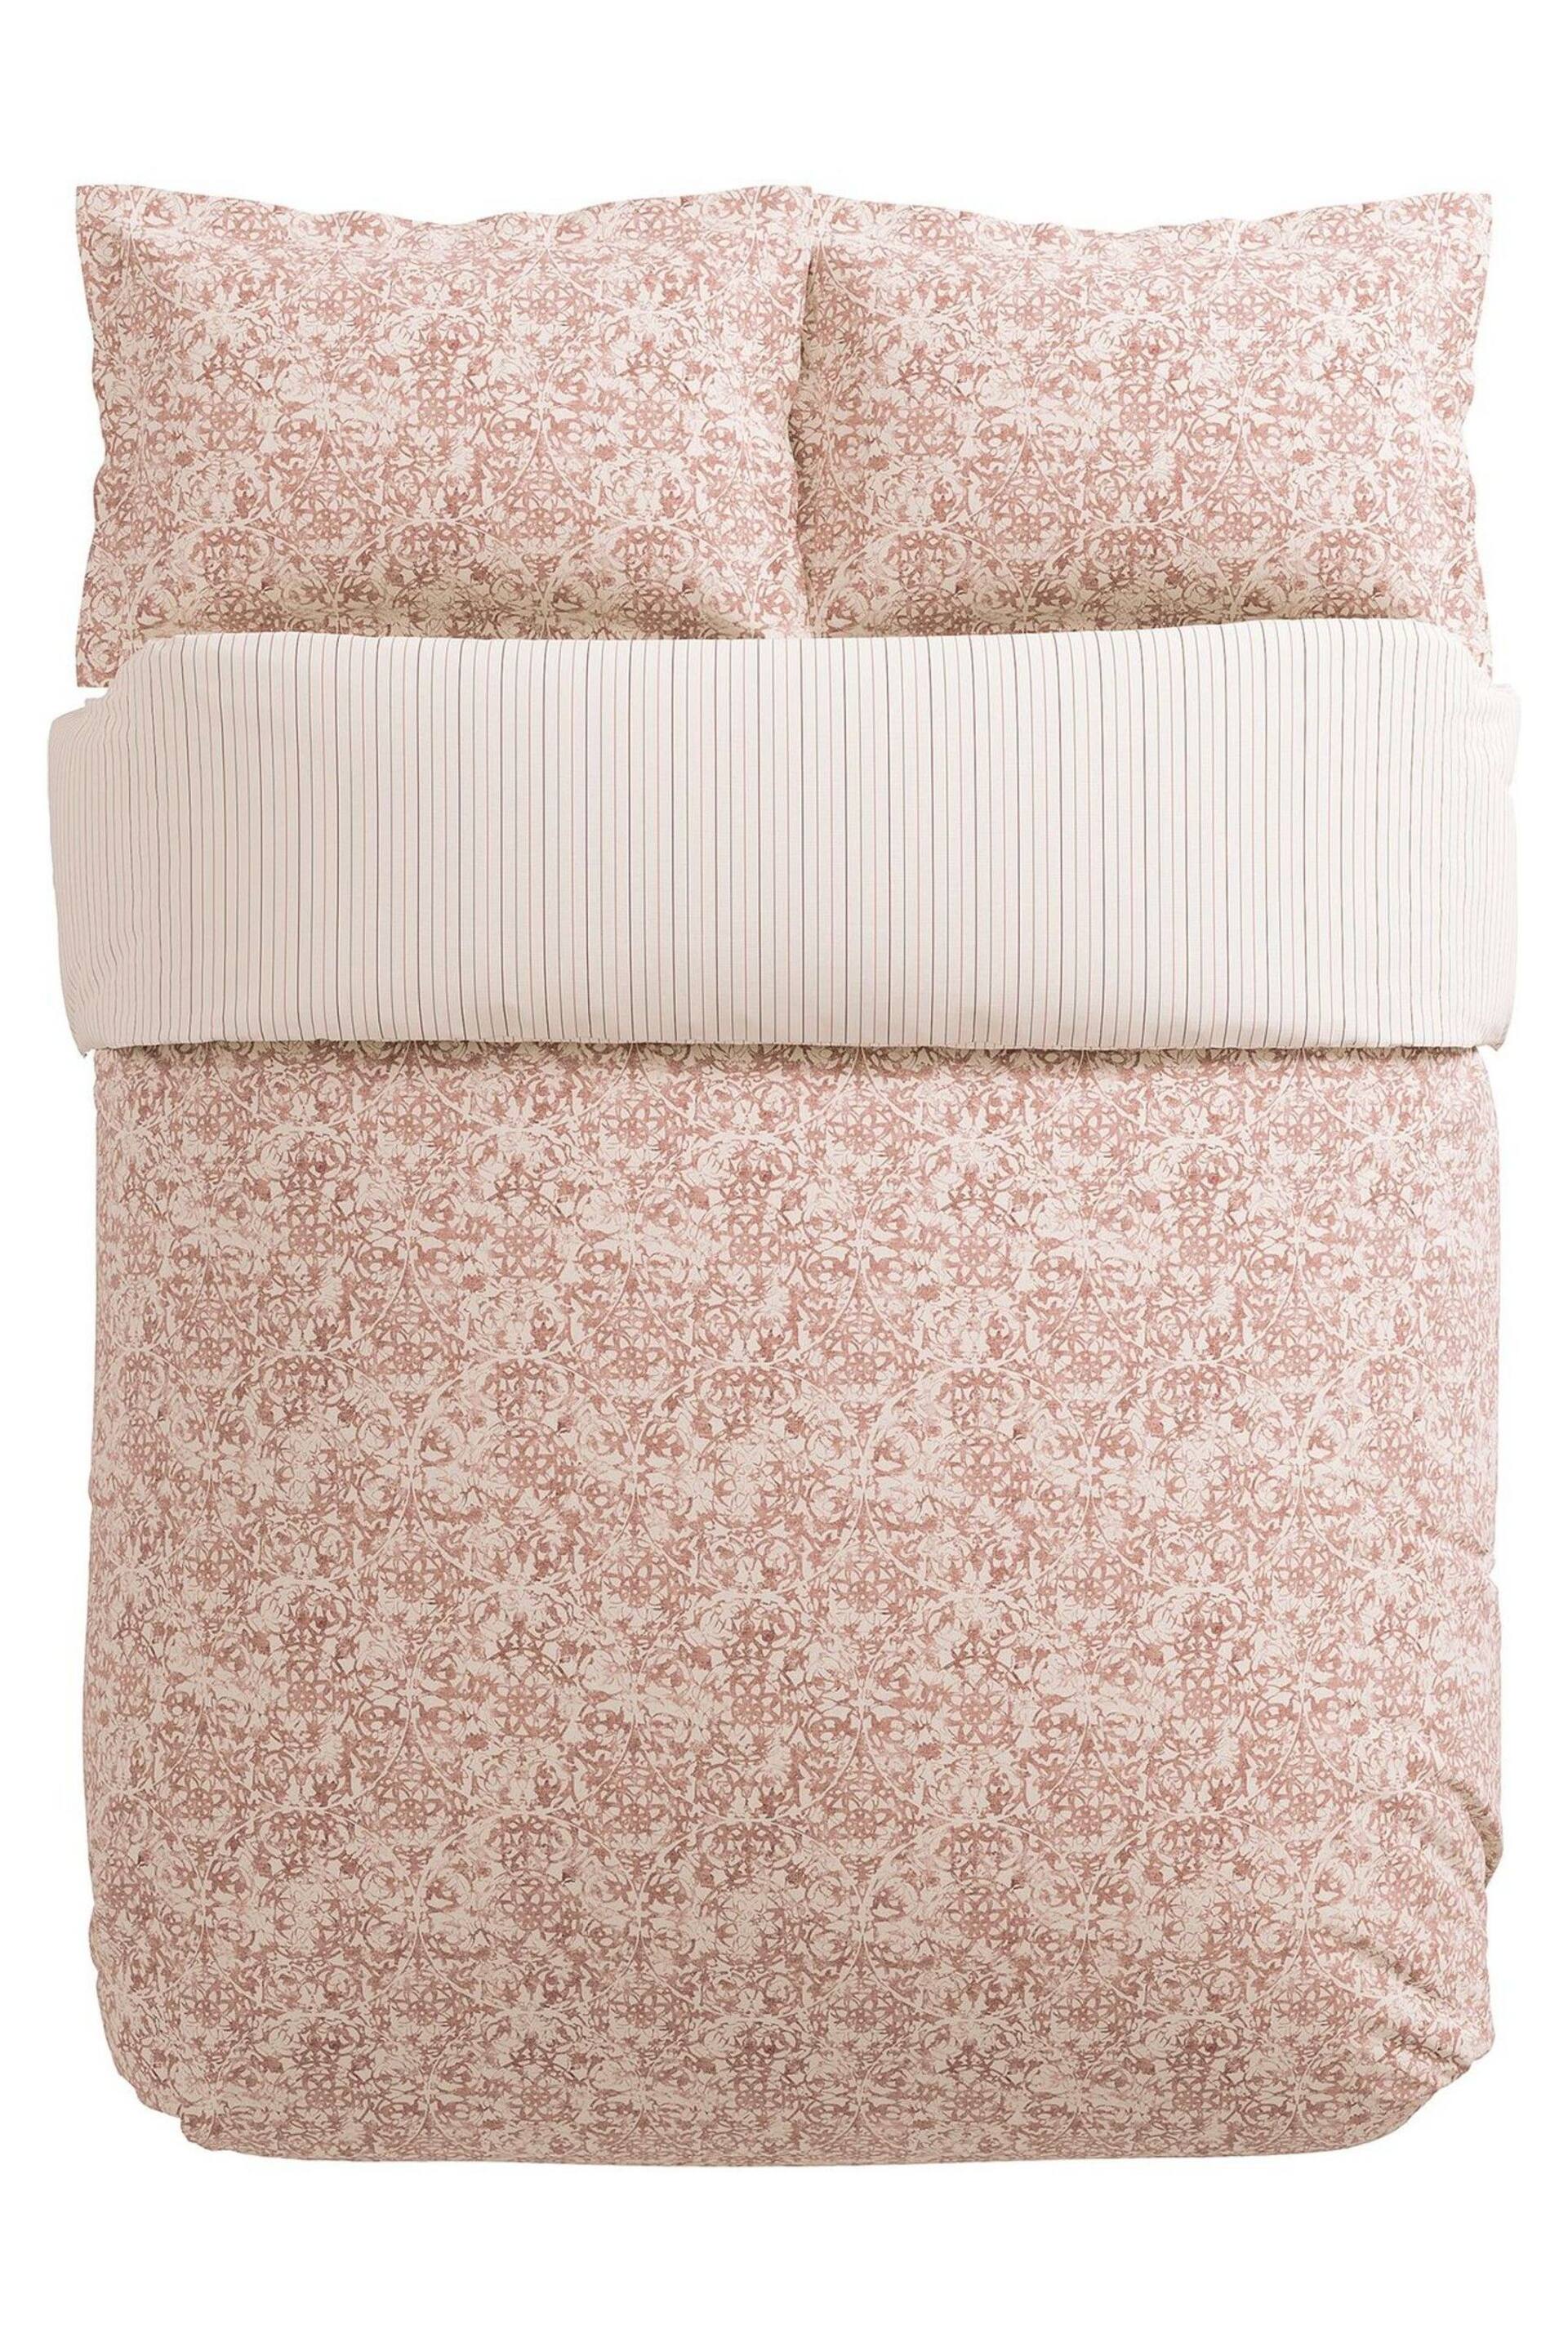 Bedeck of Belfast Coral Celina Duvet Cover and Pillowcase Set - Image 4 of 4